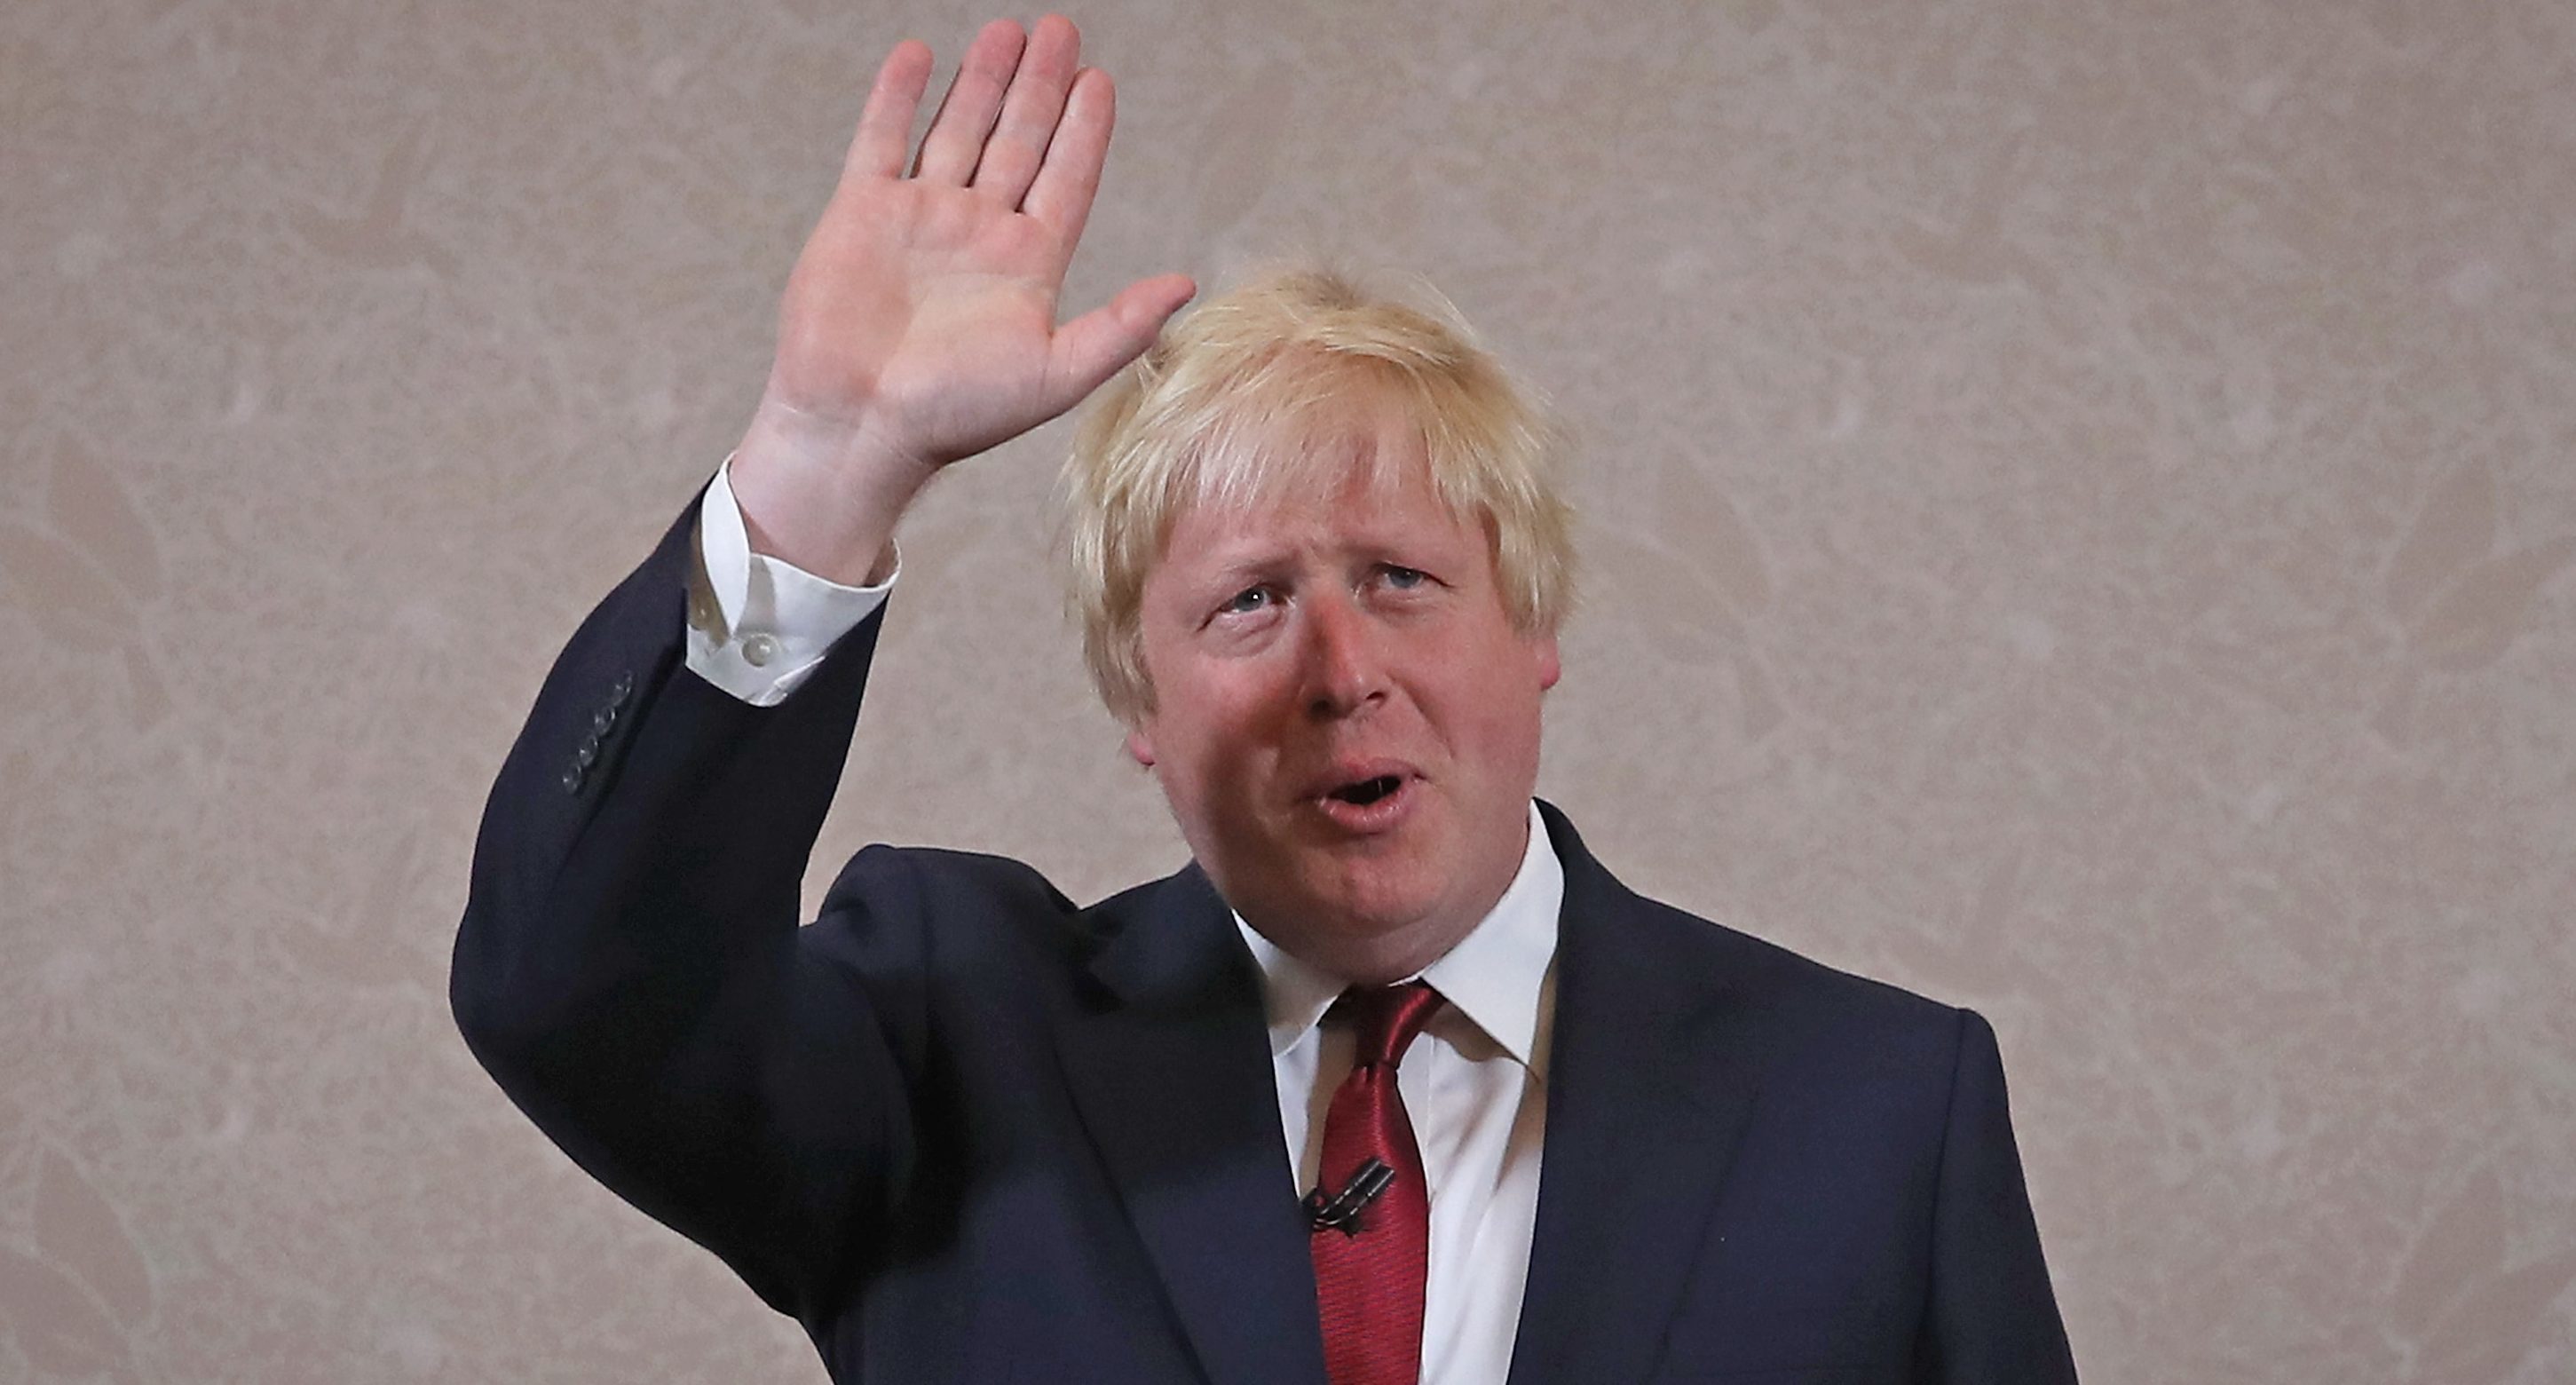 Not a wave goodbye - expect Boris to be back